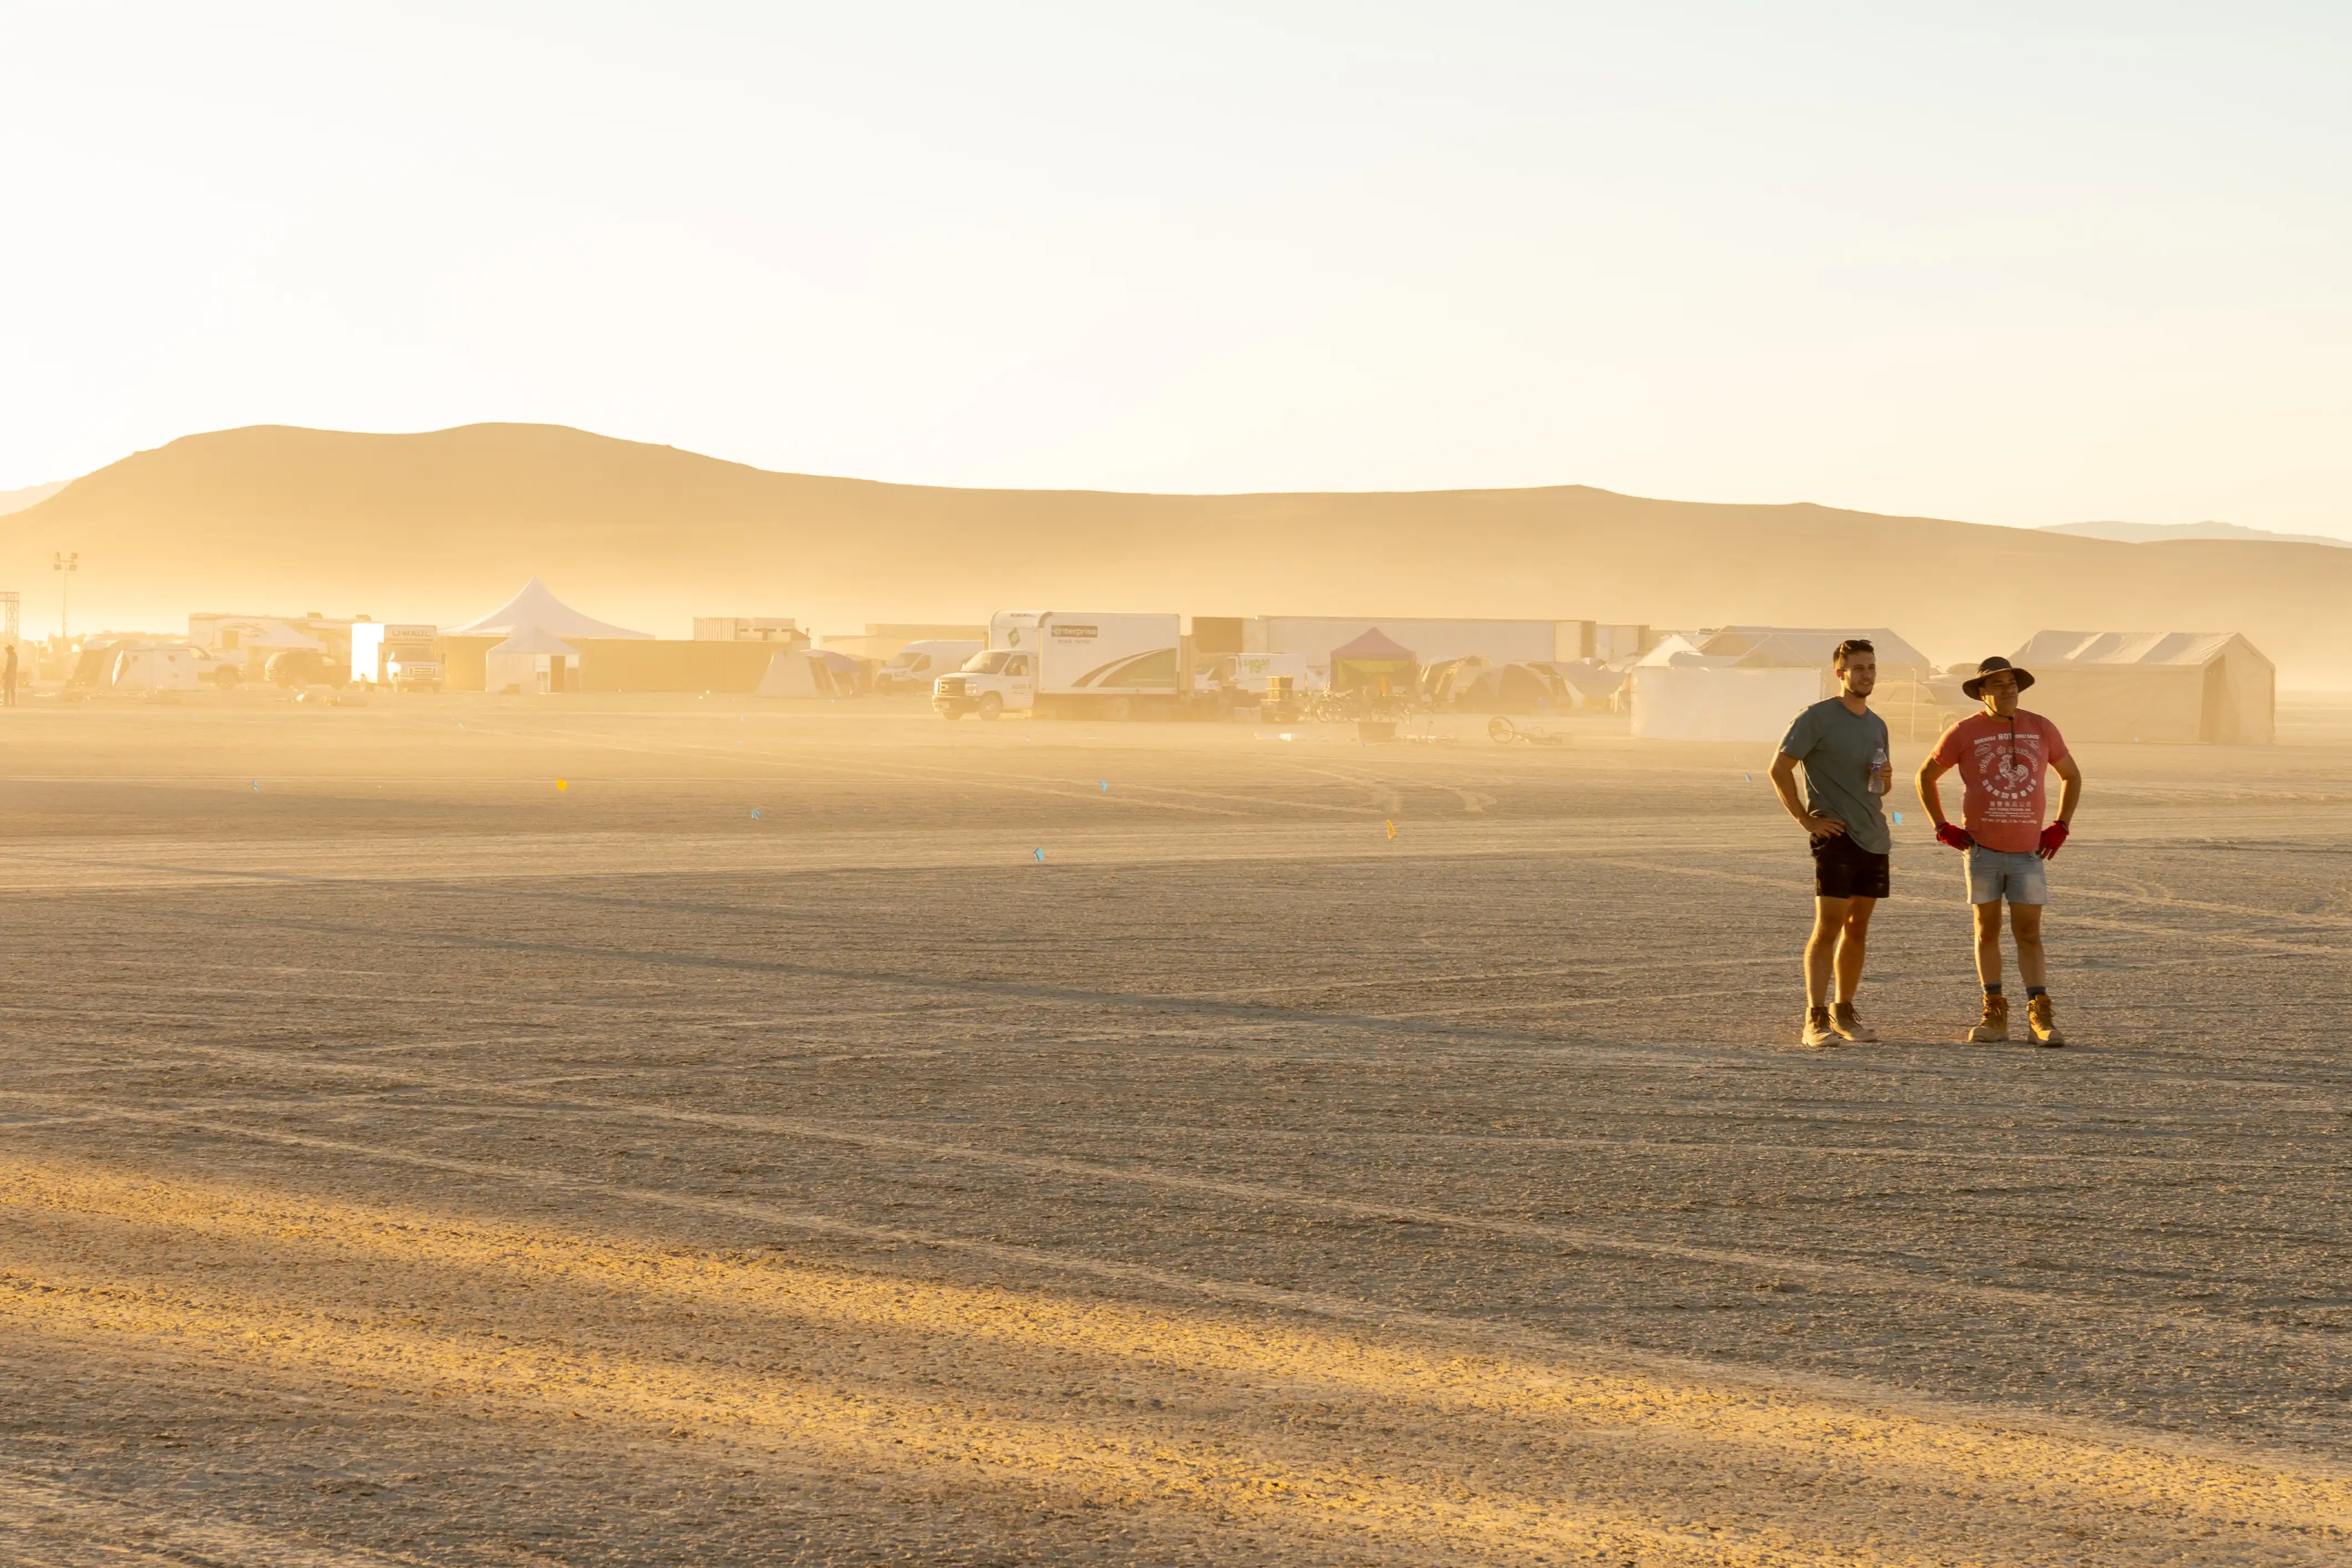 Dry lake bed of Burning Man playa in the foreground, mountains in the background. Two men with arms akimbo inspect a big, empty stretch of desert. Behind them a hazy, dusty scene of tents, trucks, and shade structures.